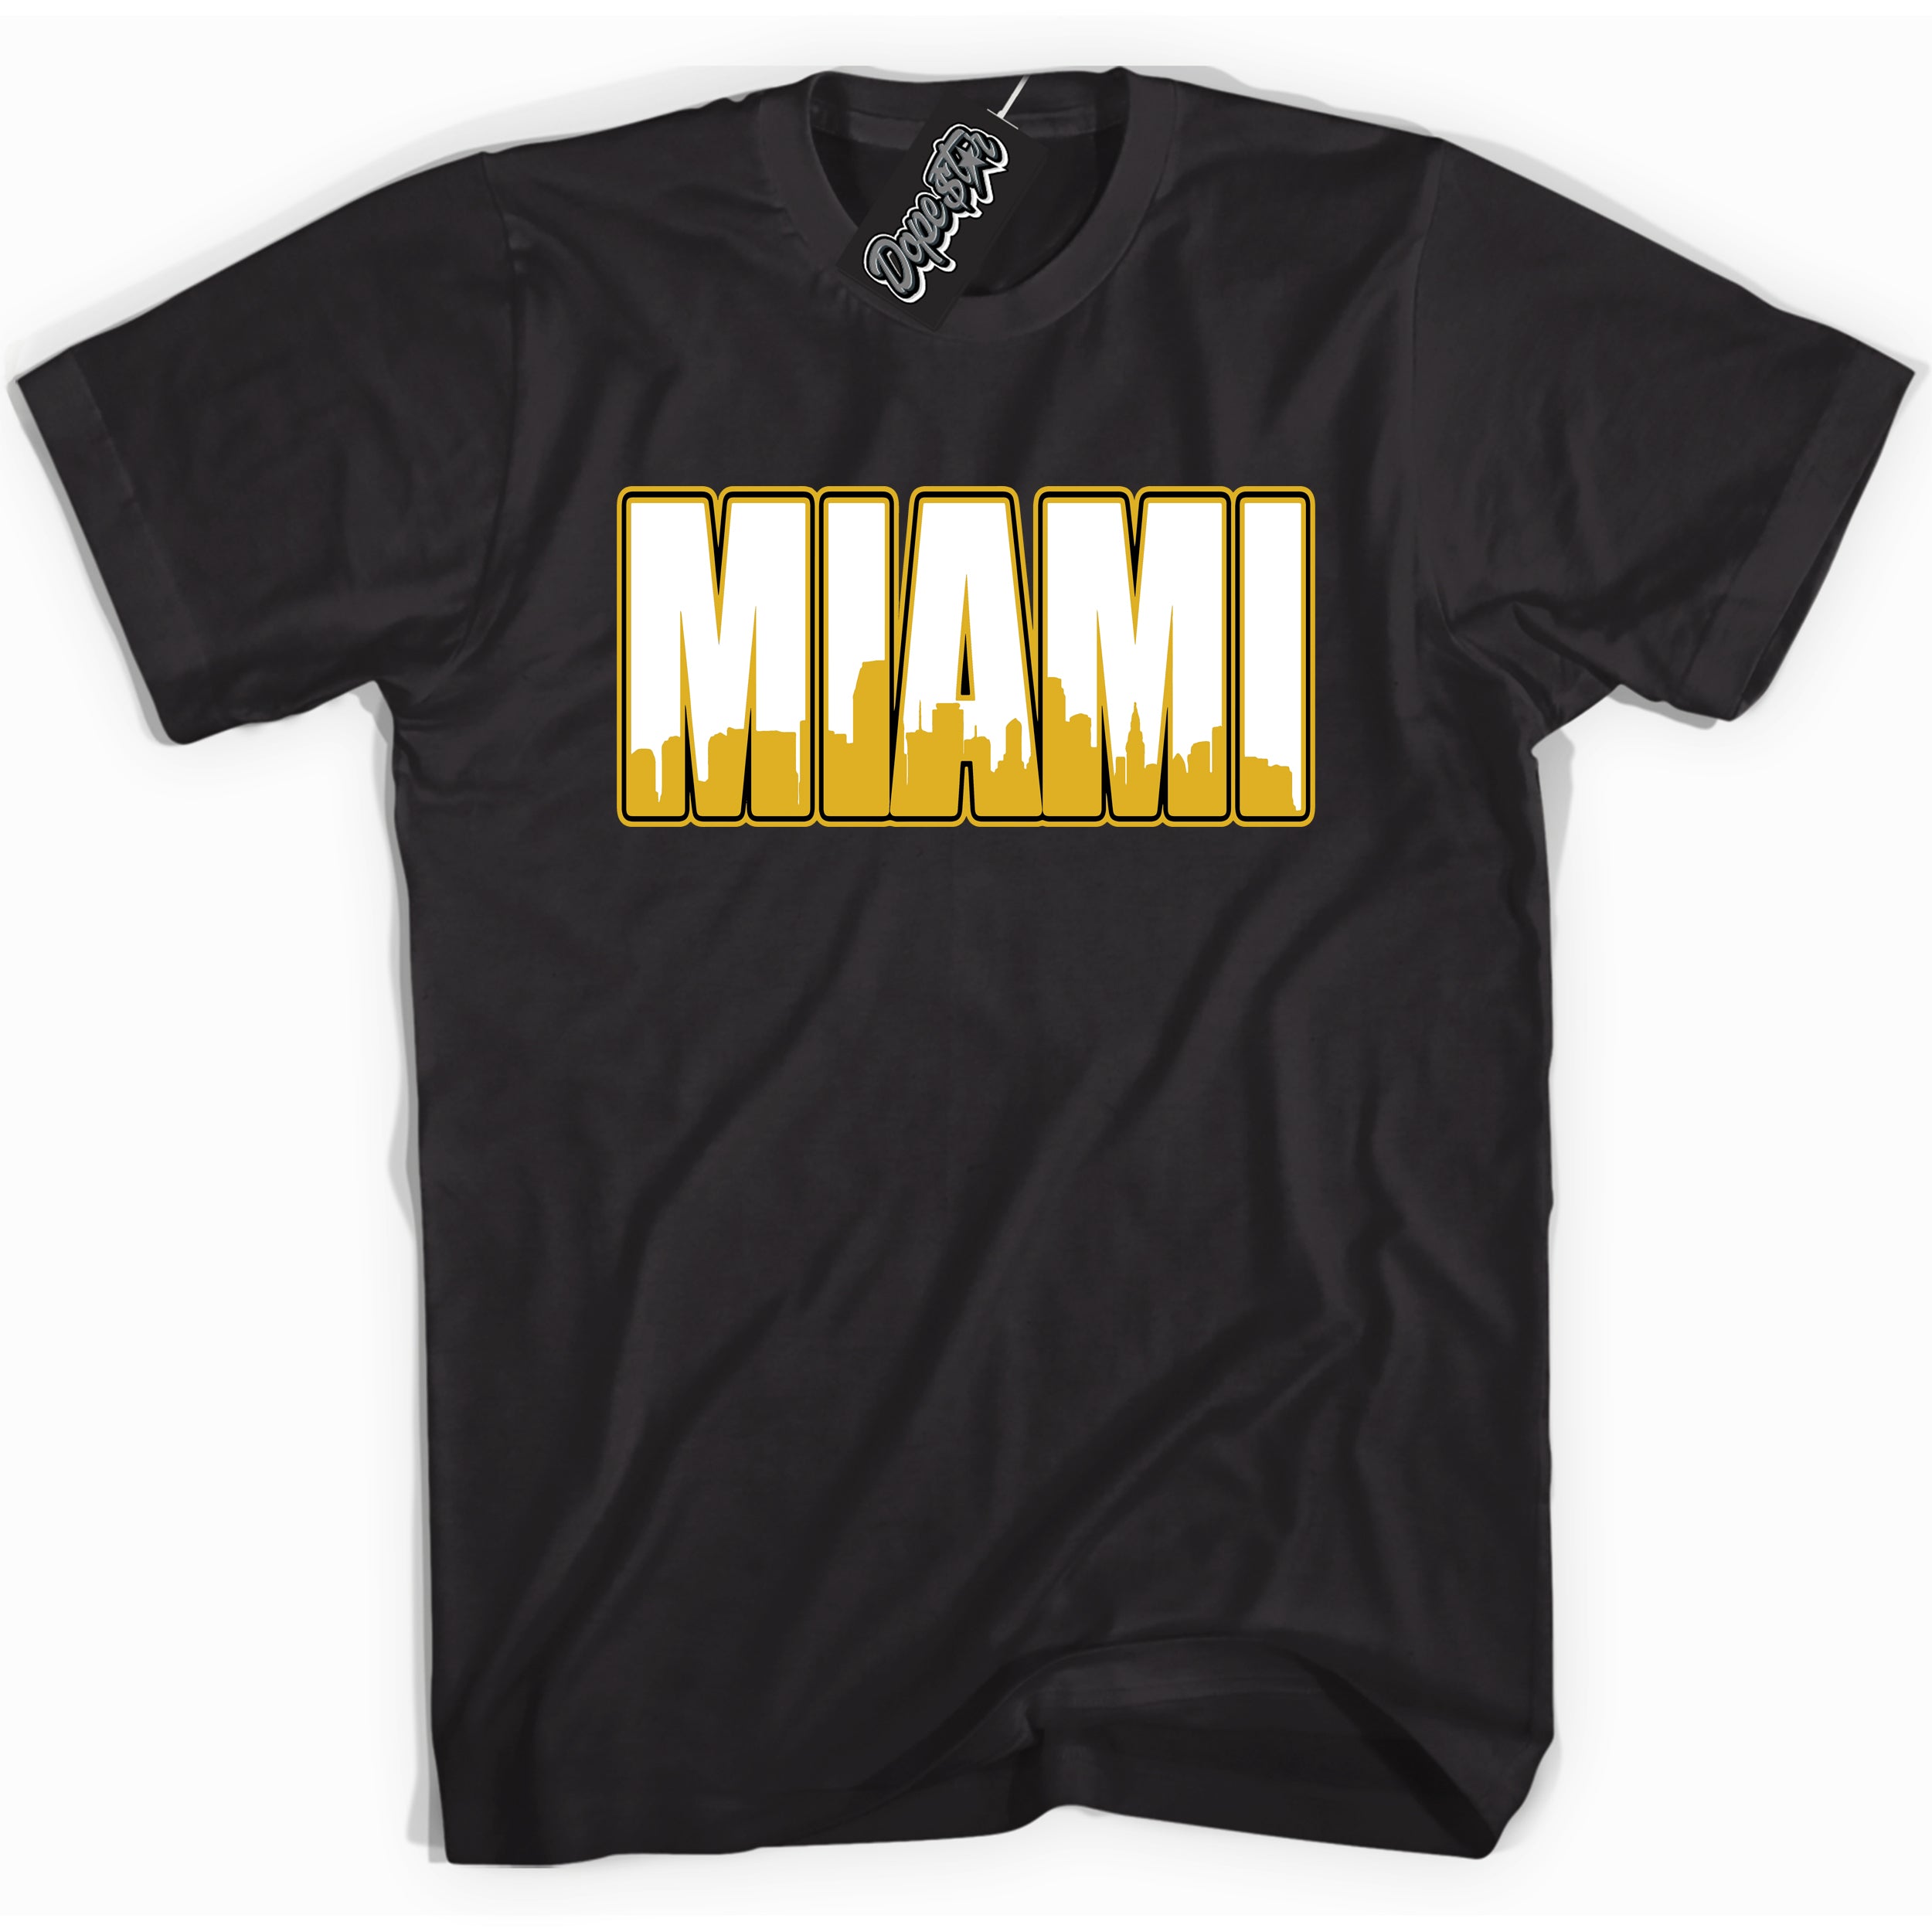 Cool Black Shirt with “ Miami ” design that perfectly matches Yellow Ochre 6s Sneakers.